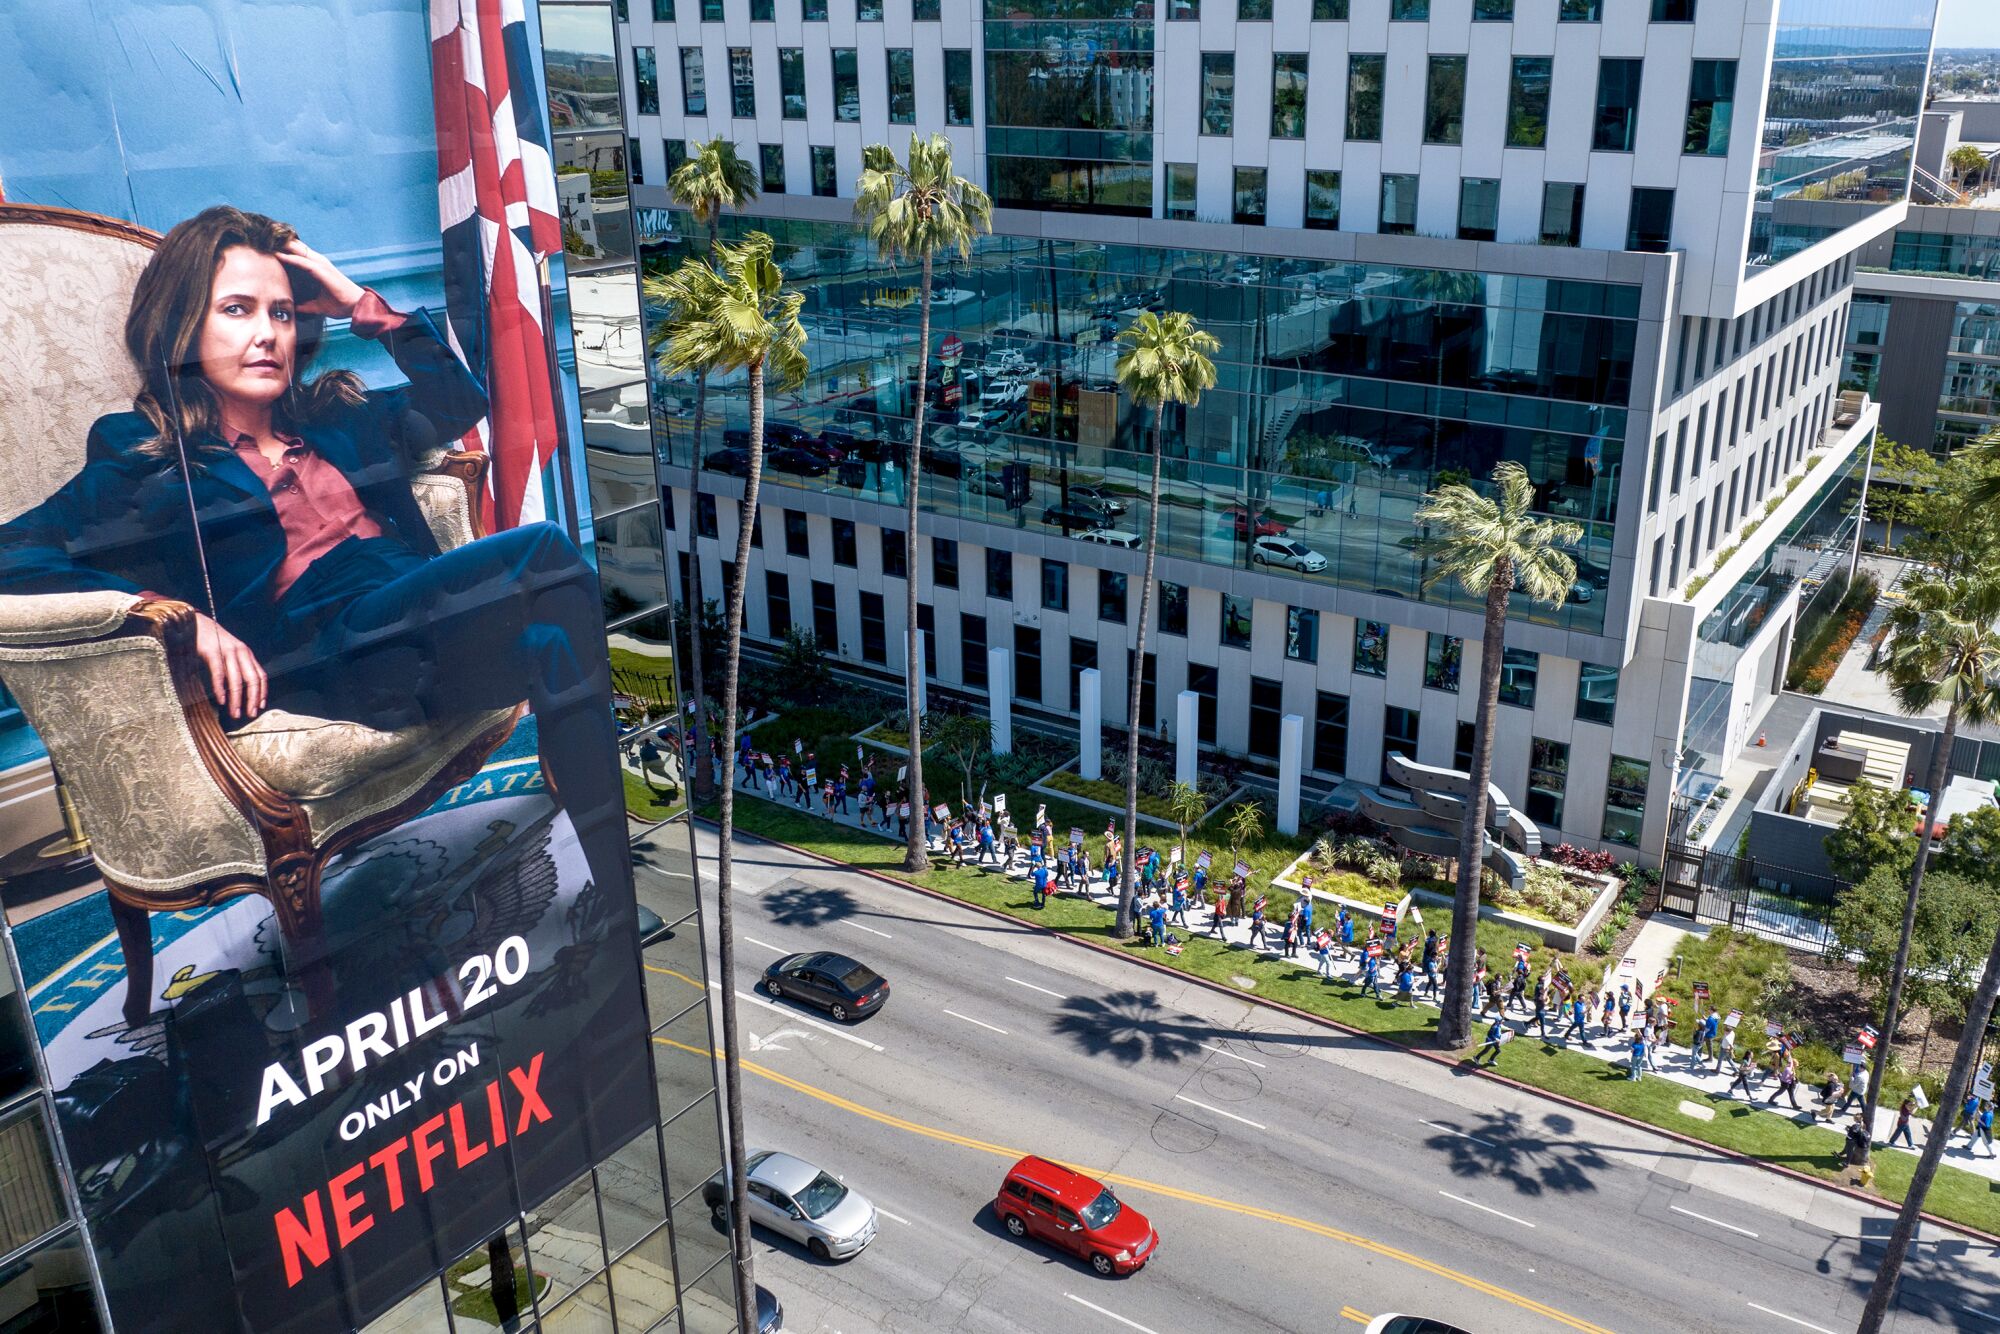 A billboard for a Netflix show hangs over a building across the street, where protesters walk along one